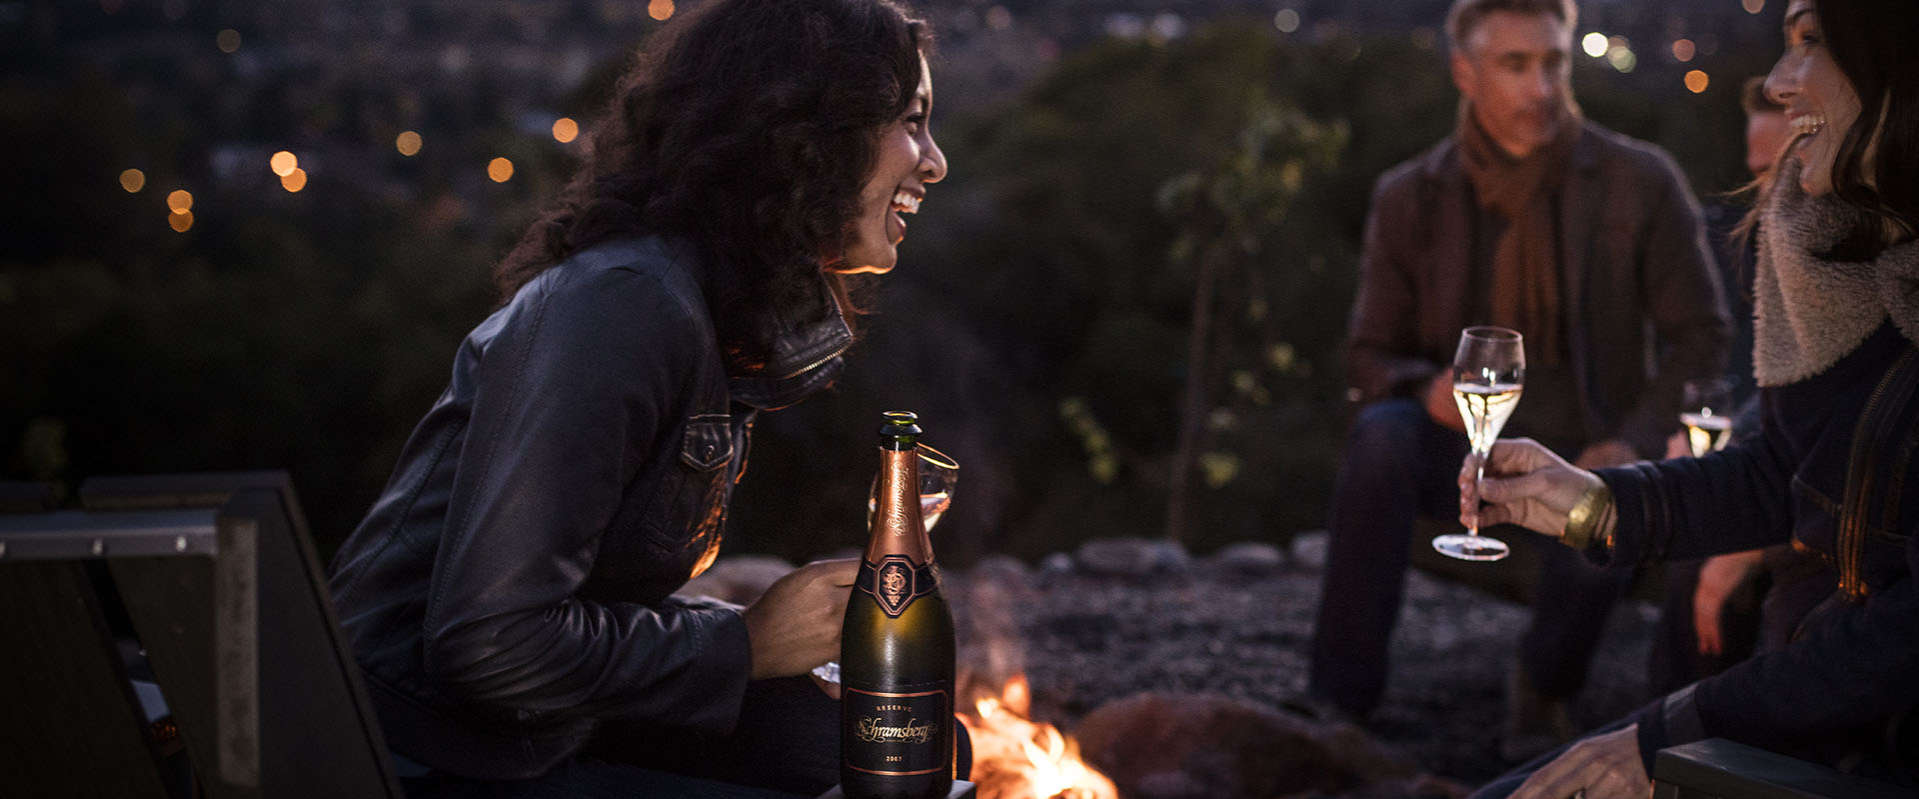 Woman laughing by a fire pit and enjoying Schramsberg sparkling wine